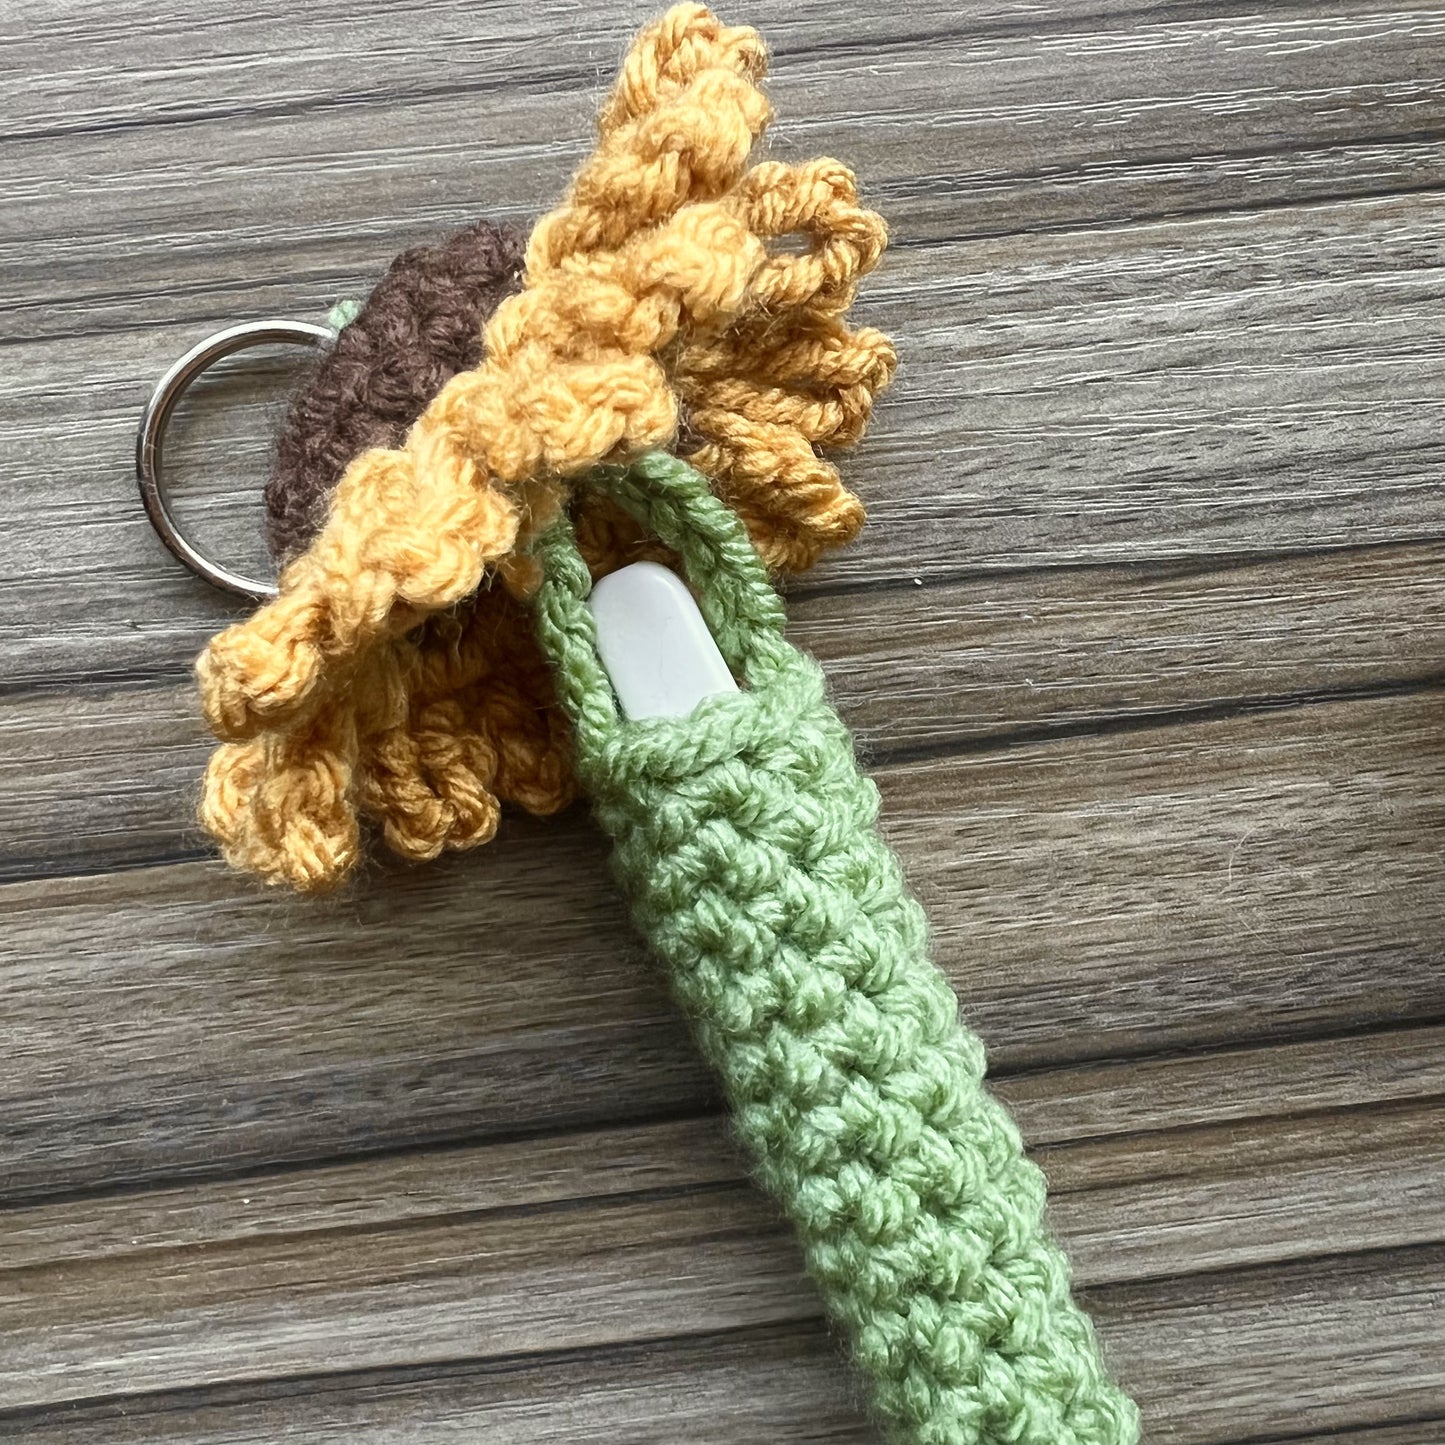 Pacifier Holder with Animals - PDF Crochet Pattern - Instant Download